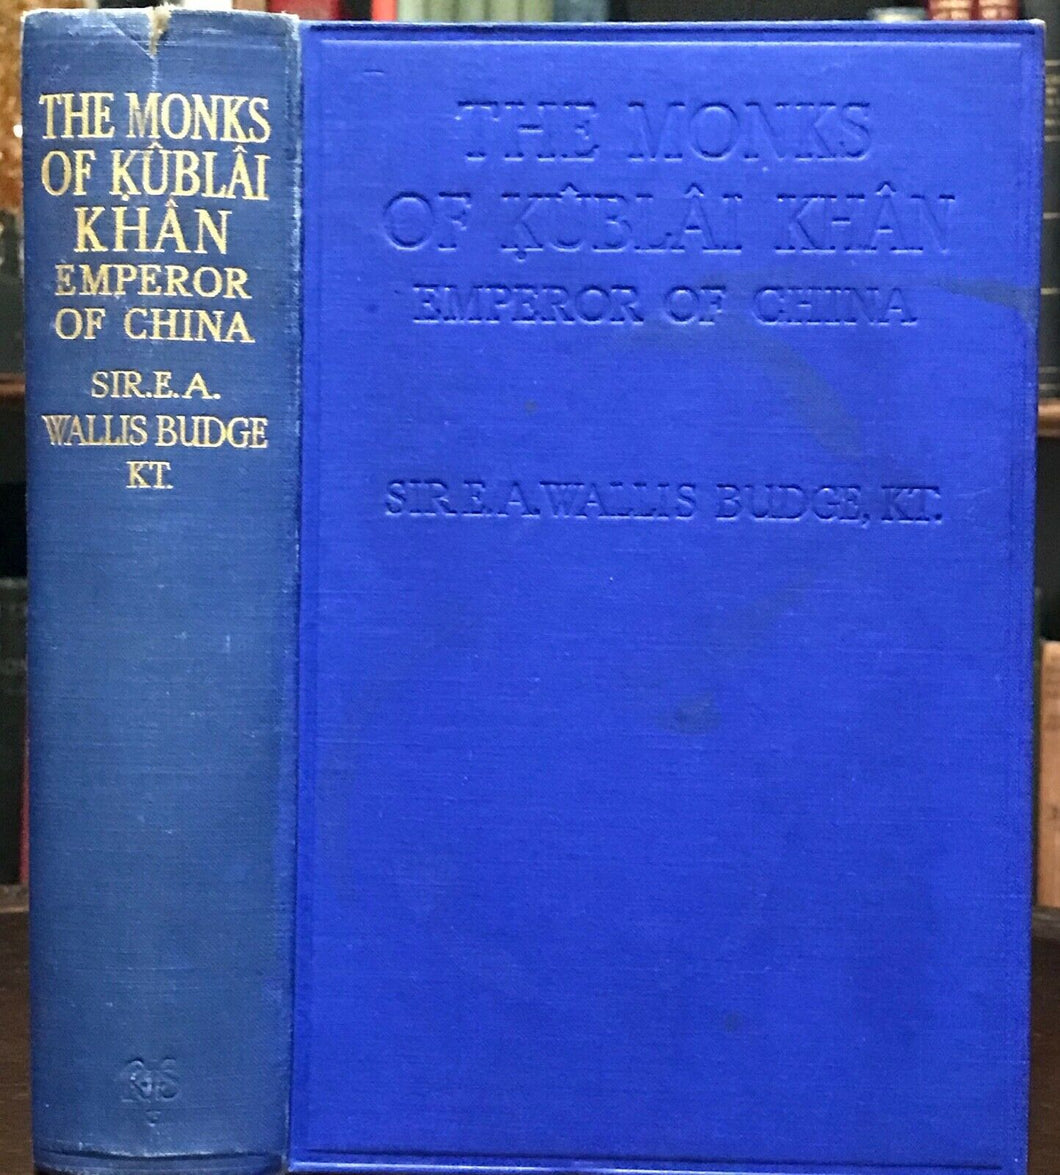 MONKS OF KUBLAI KHAN - Budge, 1st Ed 1928 - ANCIENT HISTORY PERSIA MIDDLE EAST